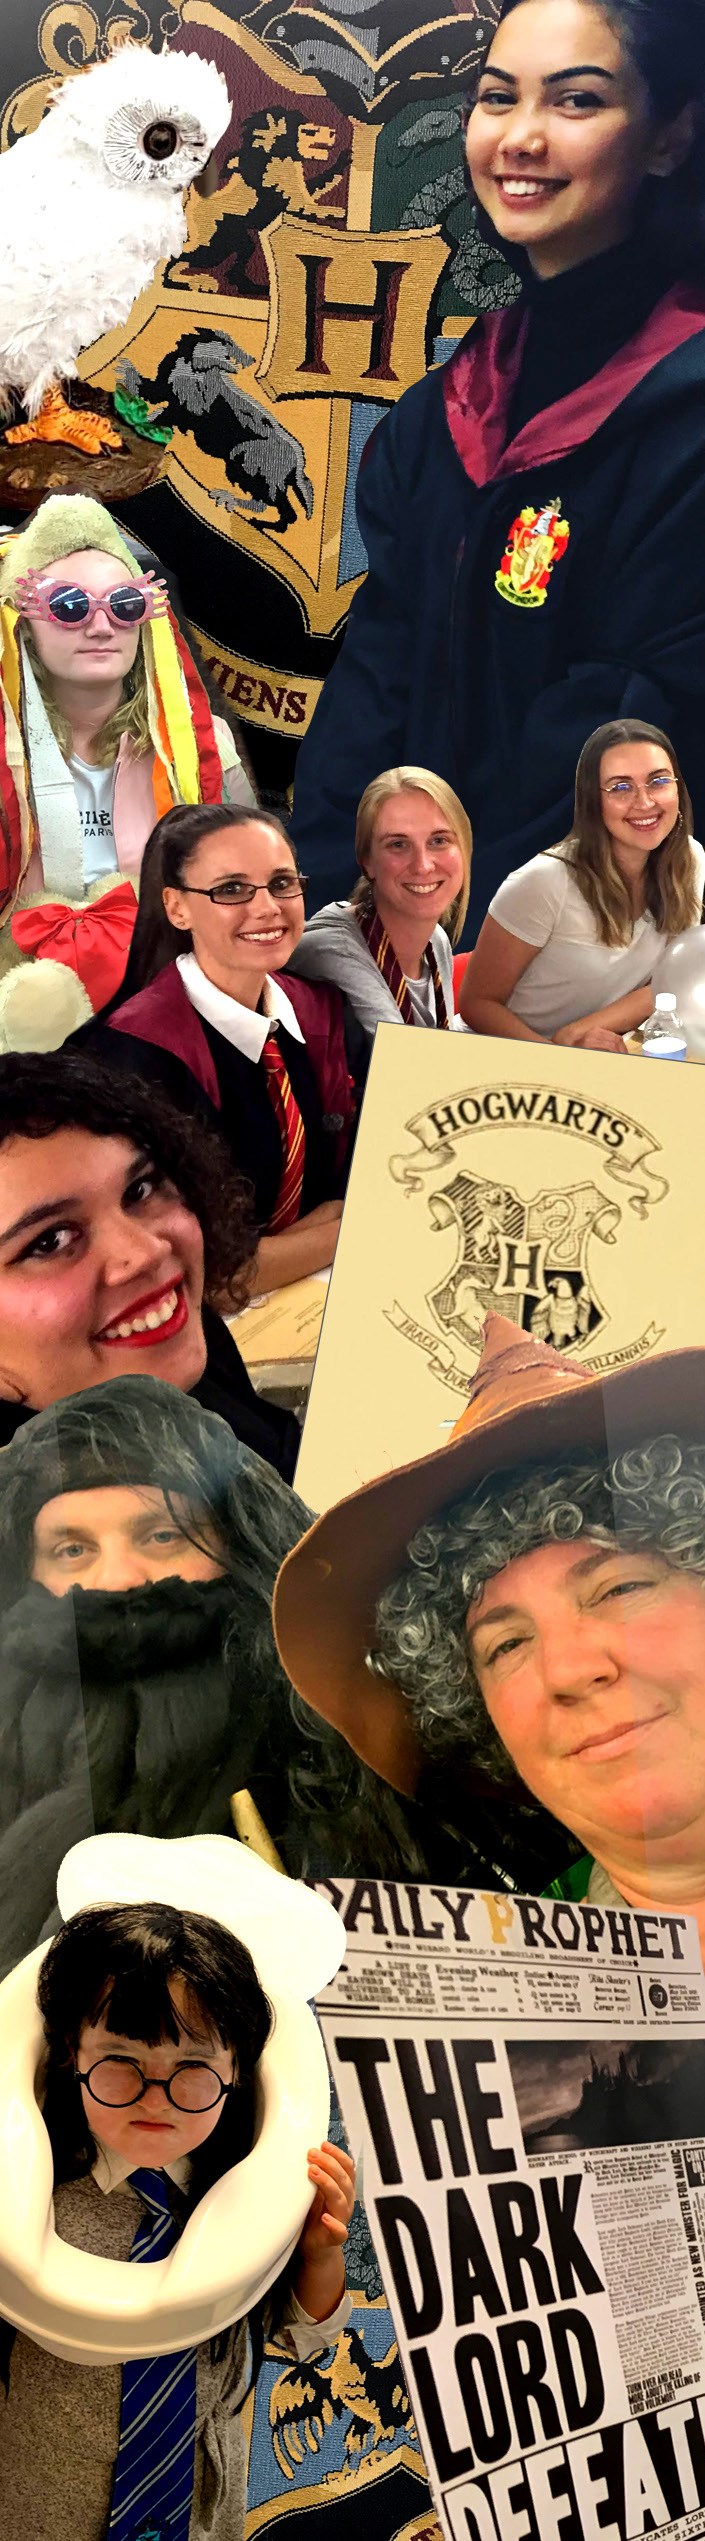 Harry Potter themed event in school library